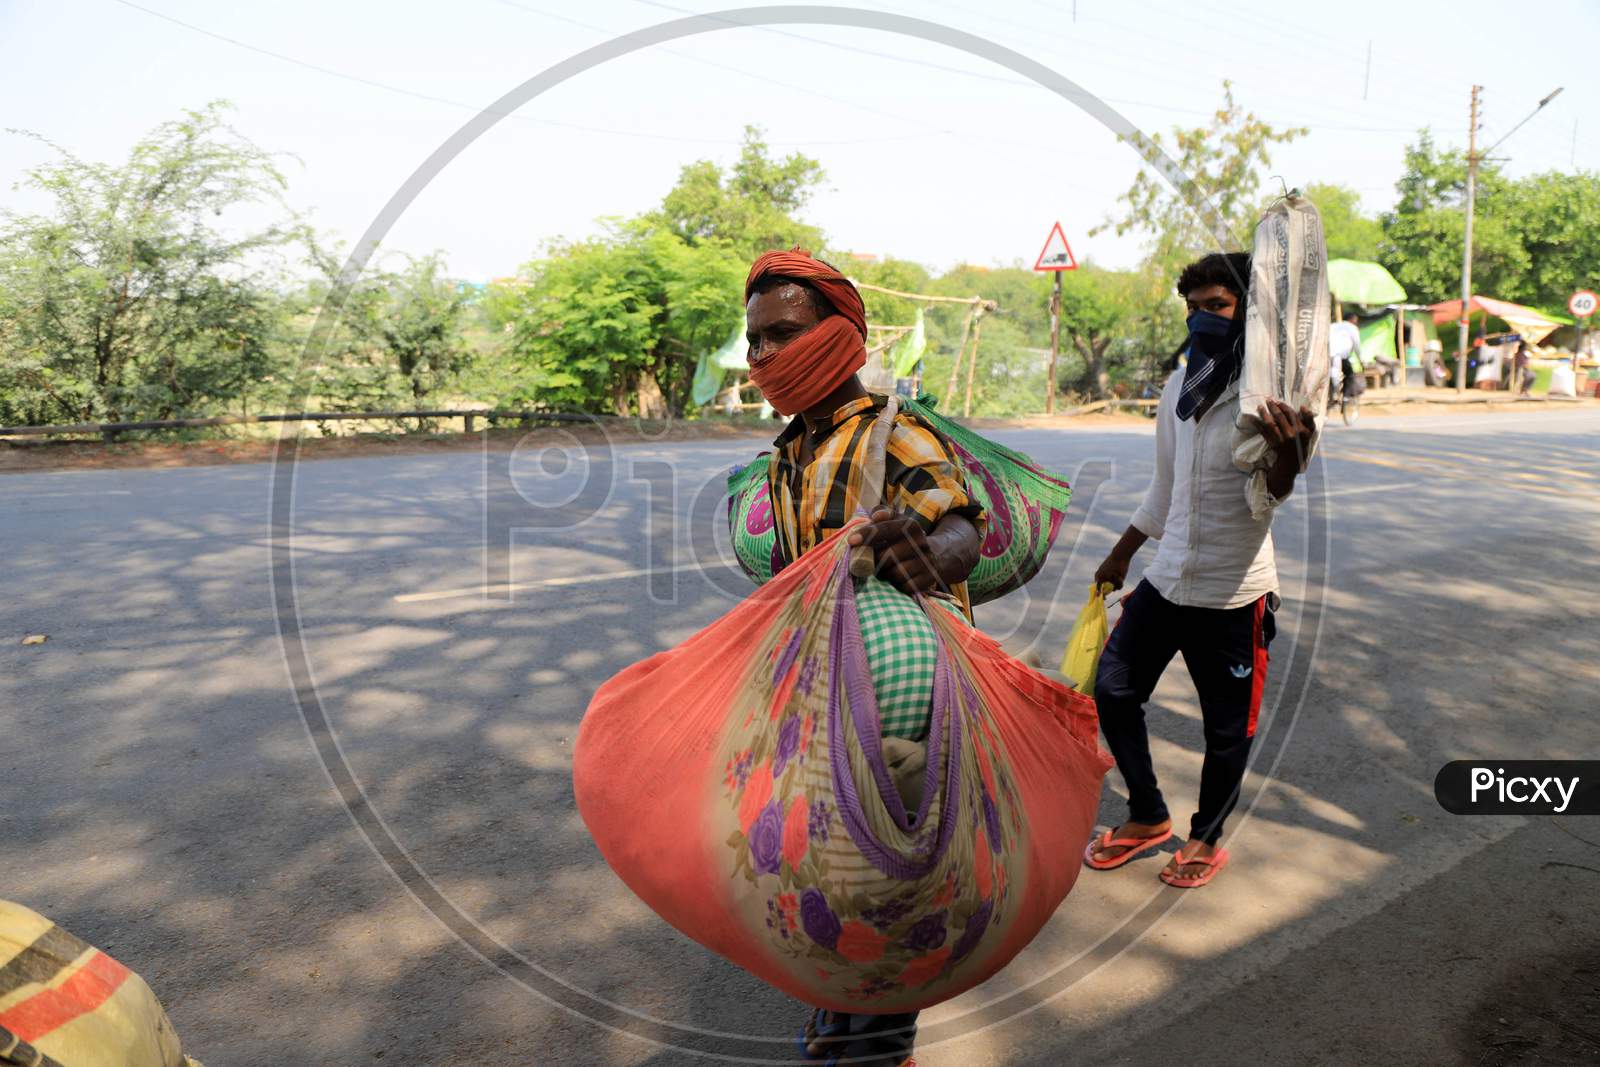 Migrant labourers carry goods as the walk on the road during an extended nationwide lockdown to slow the spread of the coronavirus disease, in Prayagraj, May 4, 2020.